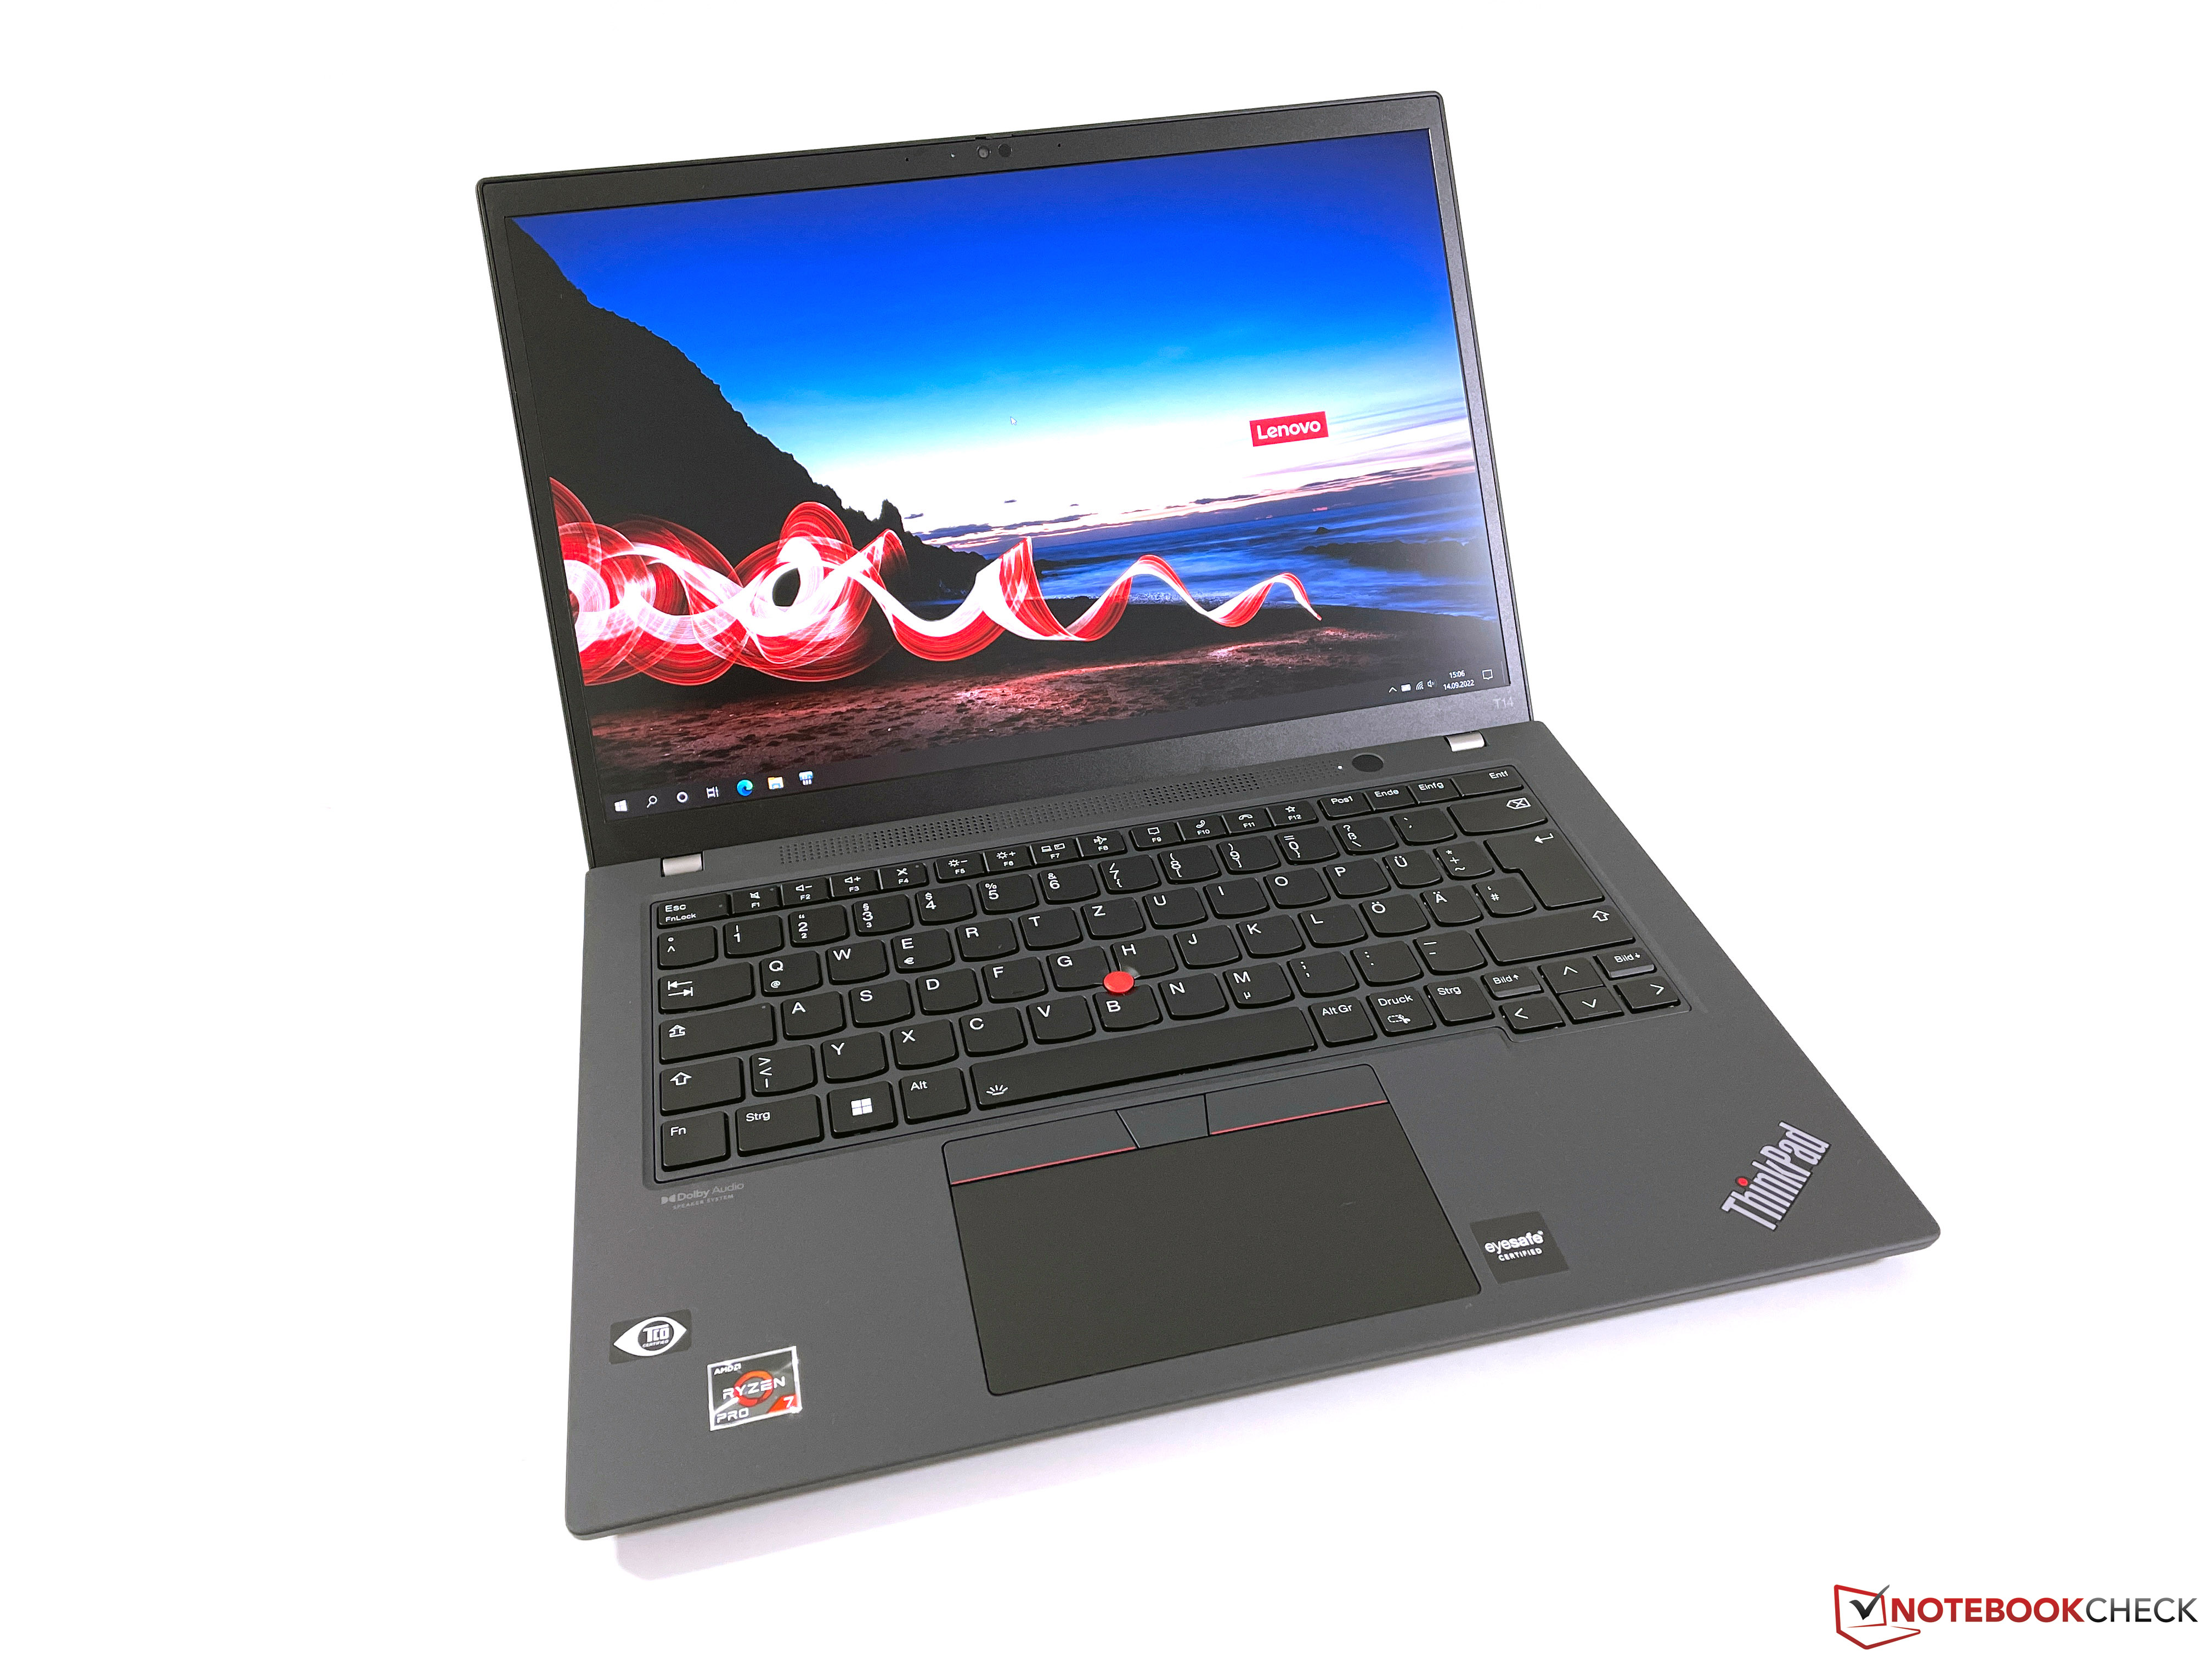 Lenovo ThinkPad T14 G3 review: Business laptop is better with AMD